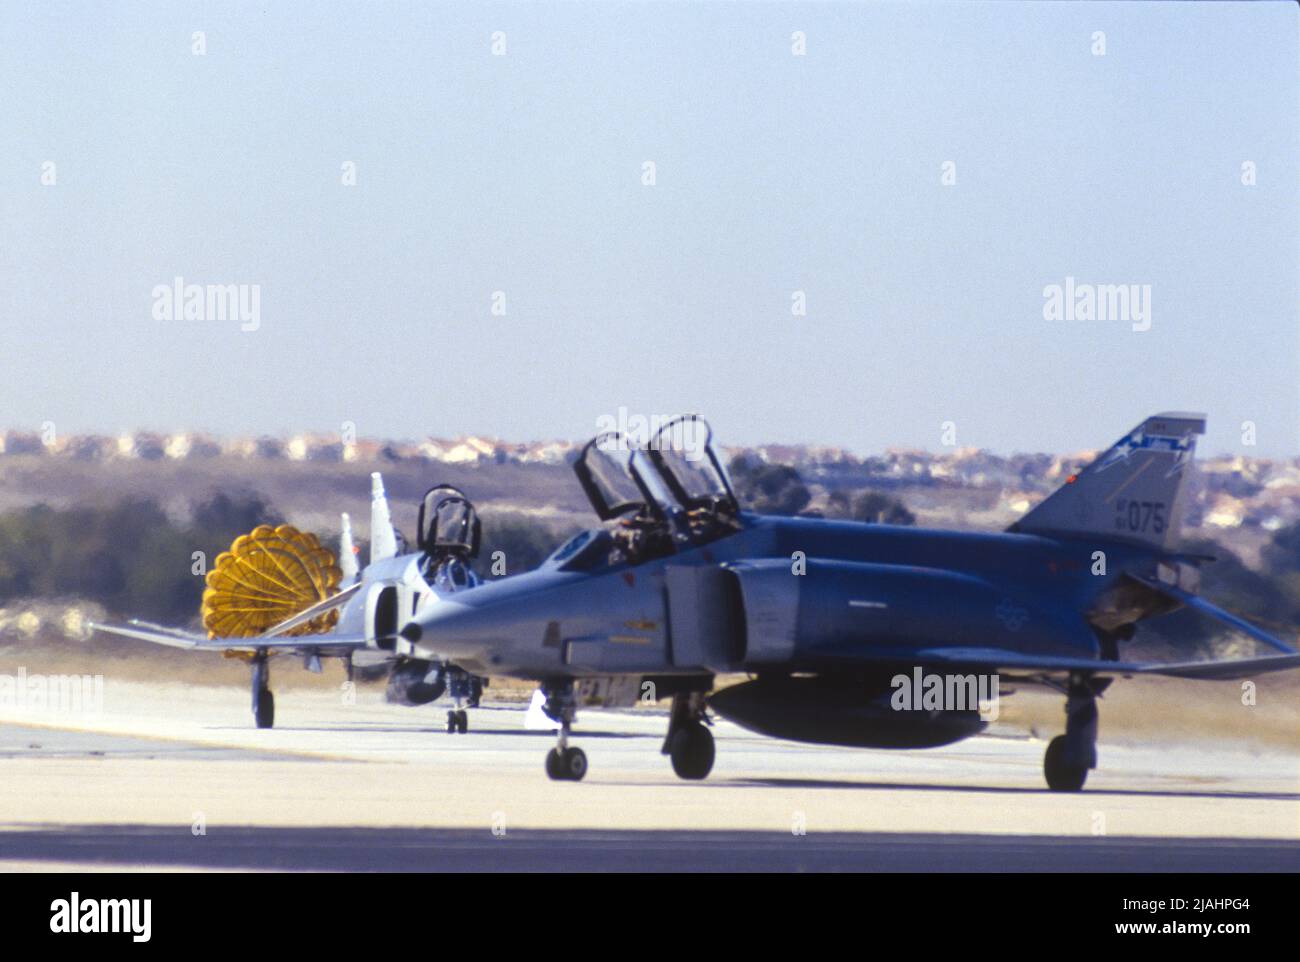 F4 Phantoms from 163rd Tactical Fighter Group, taxi at March Air Force Base in California after landing Stock Photo